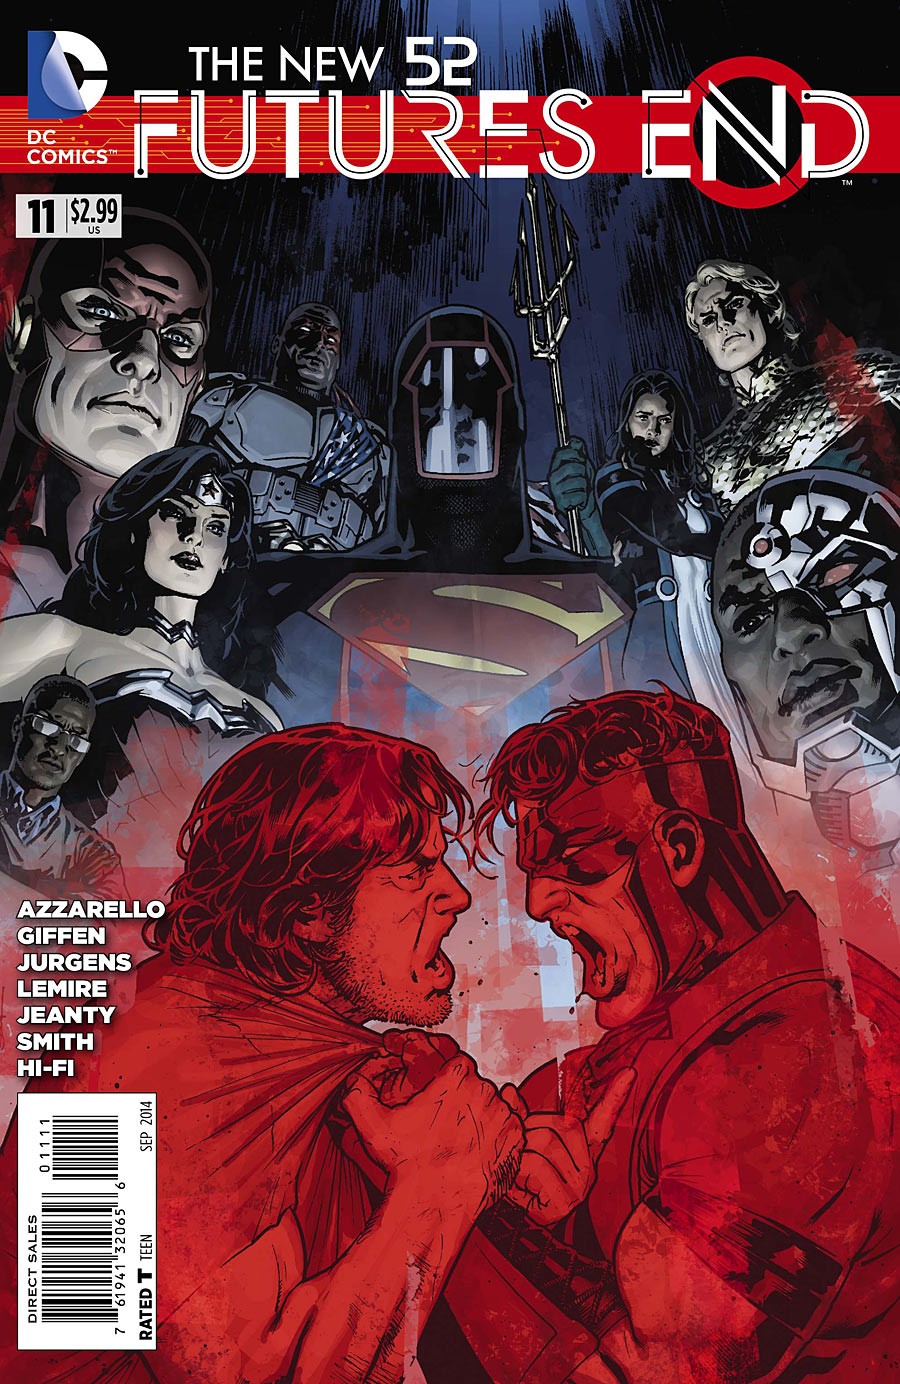 The New 52: Futures End Vol. 1 #11